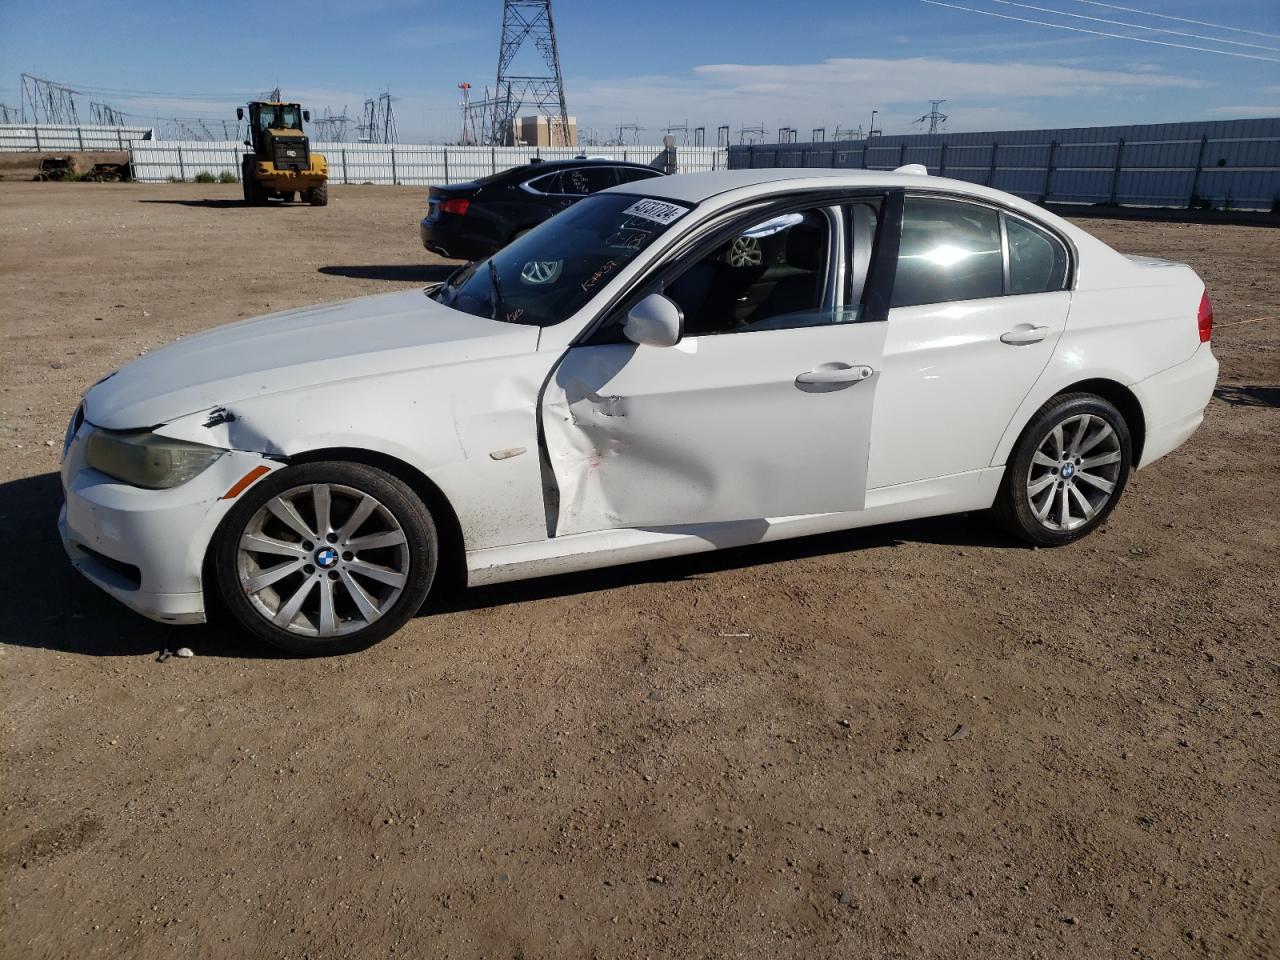 vin: WBAPH7C59BE130594 WBAPH7C59BE130594 2011 bmw 3er 3000 for Sale in 92301, Ca - Adelanto, Adelanto, USA